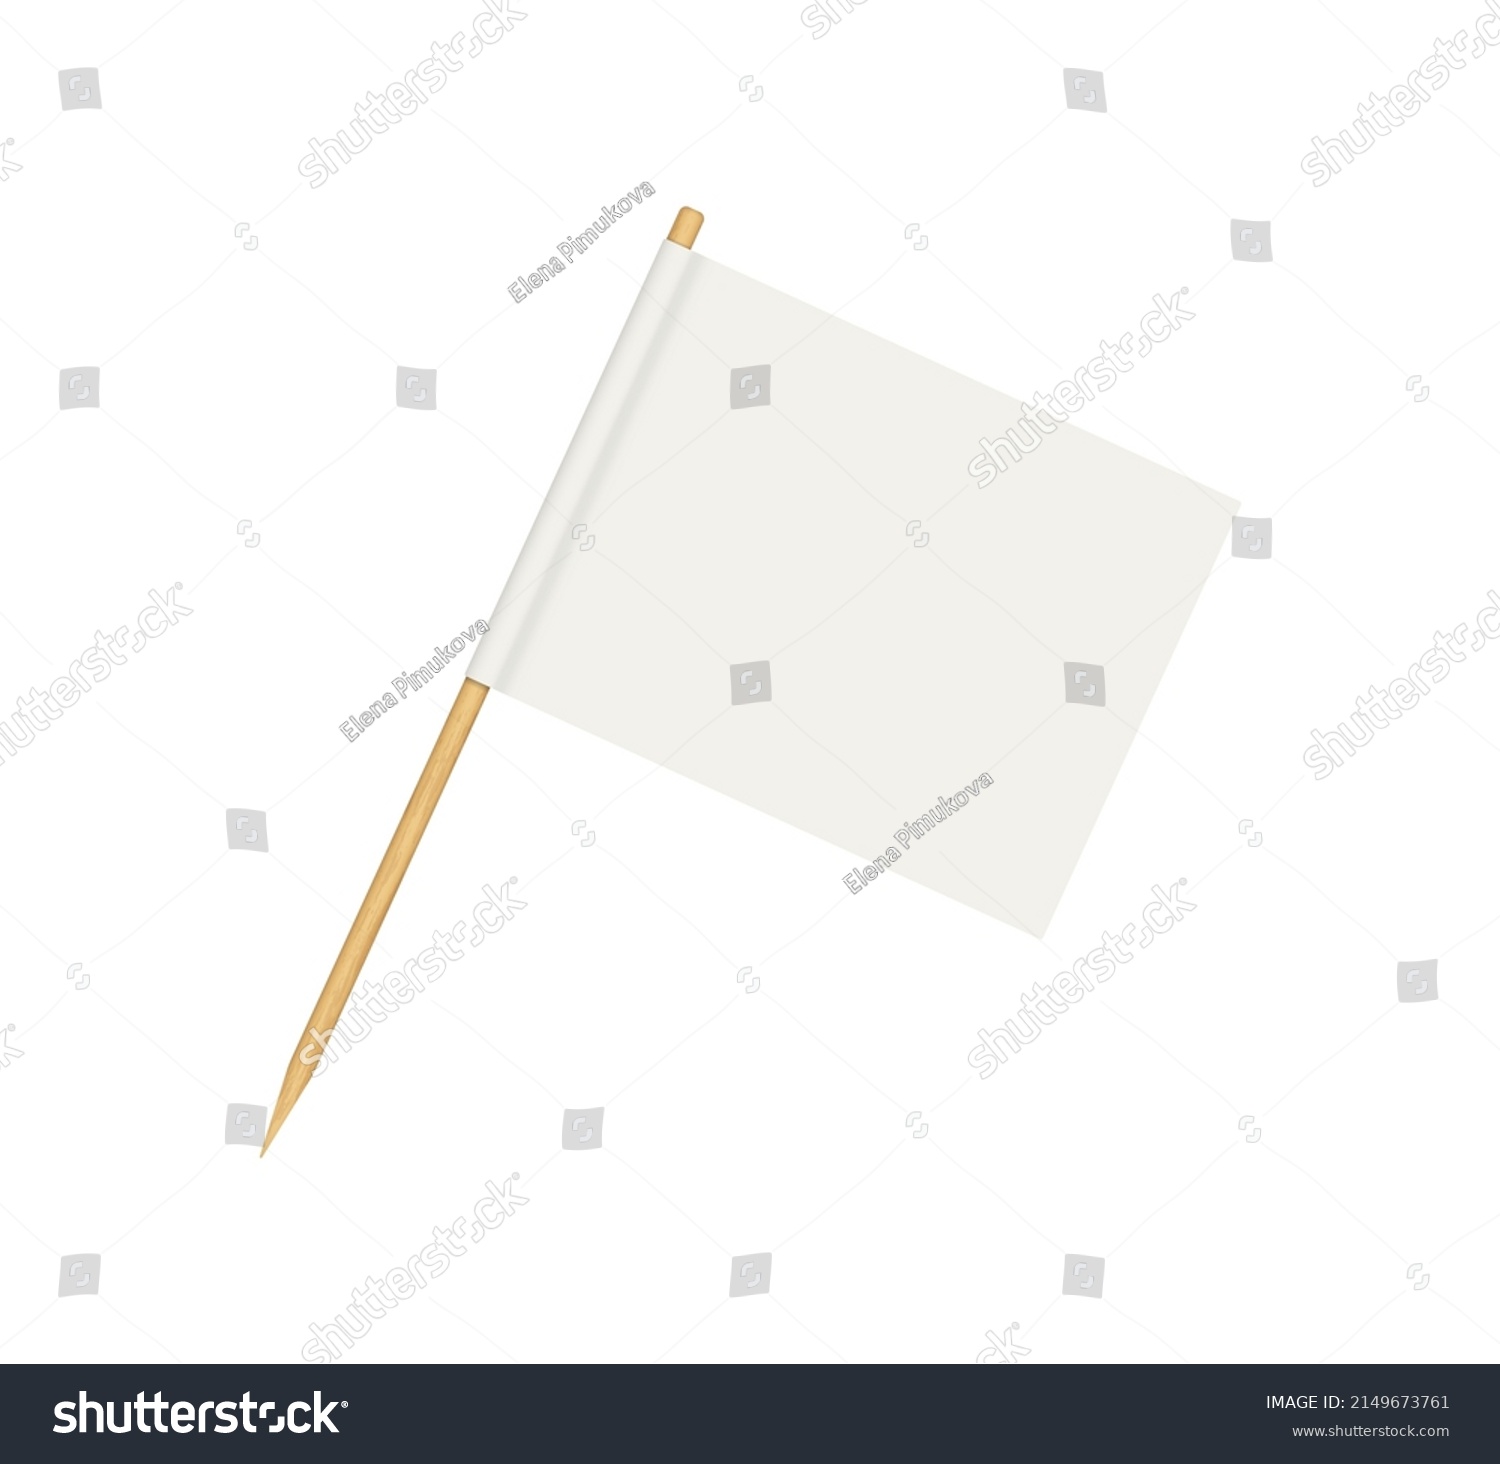 SVG of Toothpick flag. Blank flag on wooden stick. Wood toothpick with white paper banner for food and cocktail decoration. Reactangle forms of pennant. Realistic 3d vector isolated on white background. svg